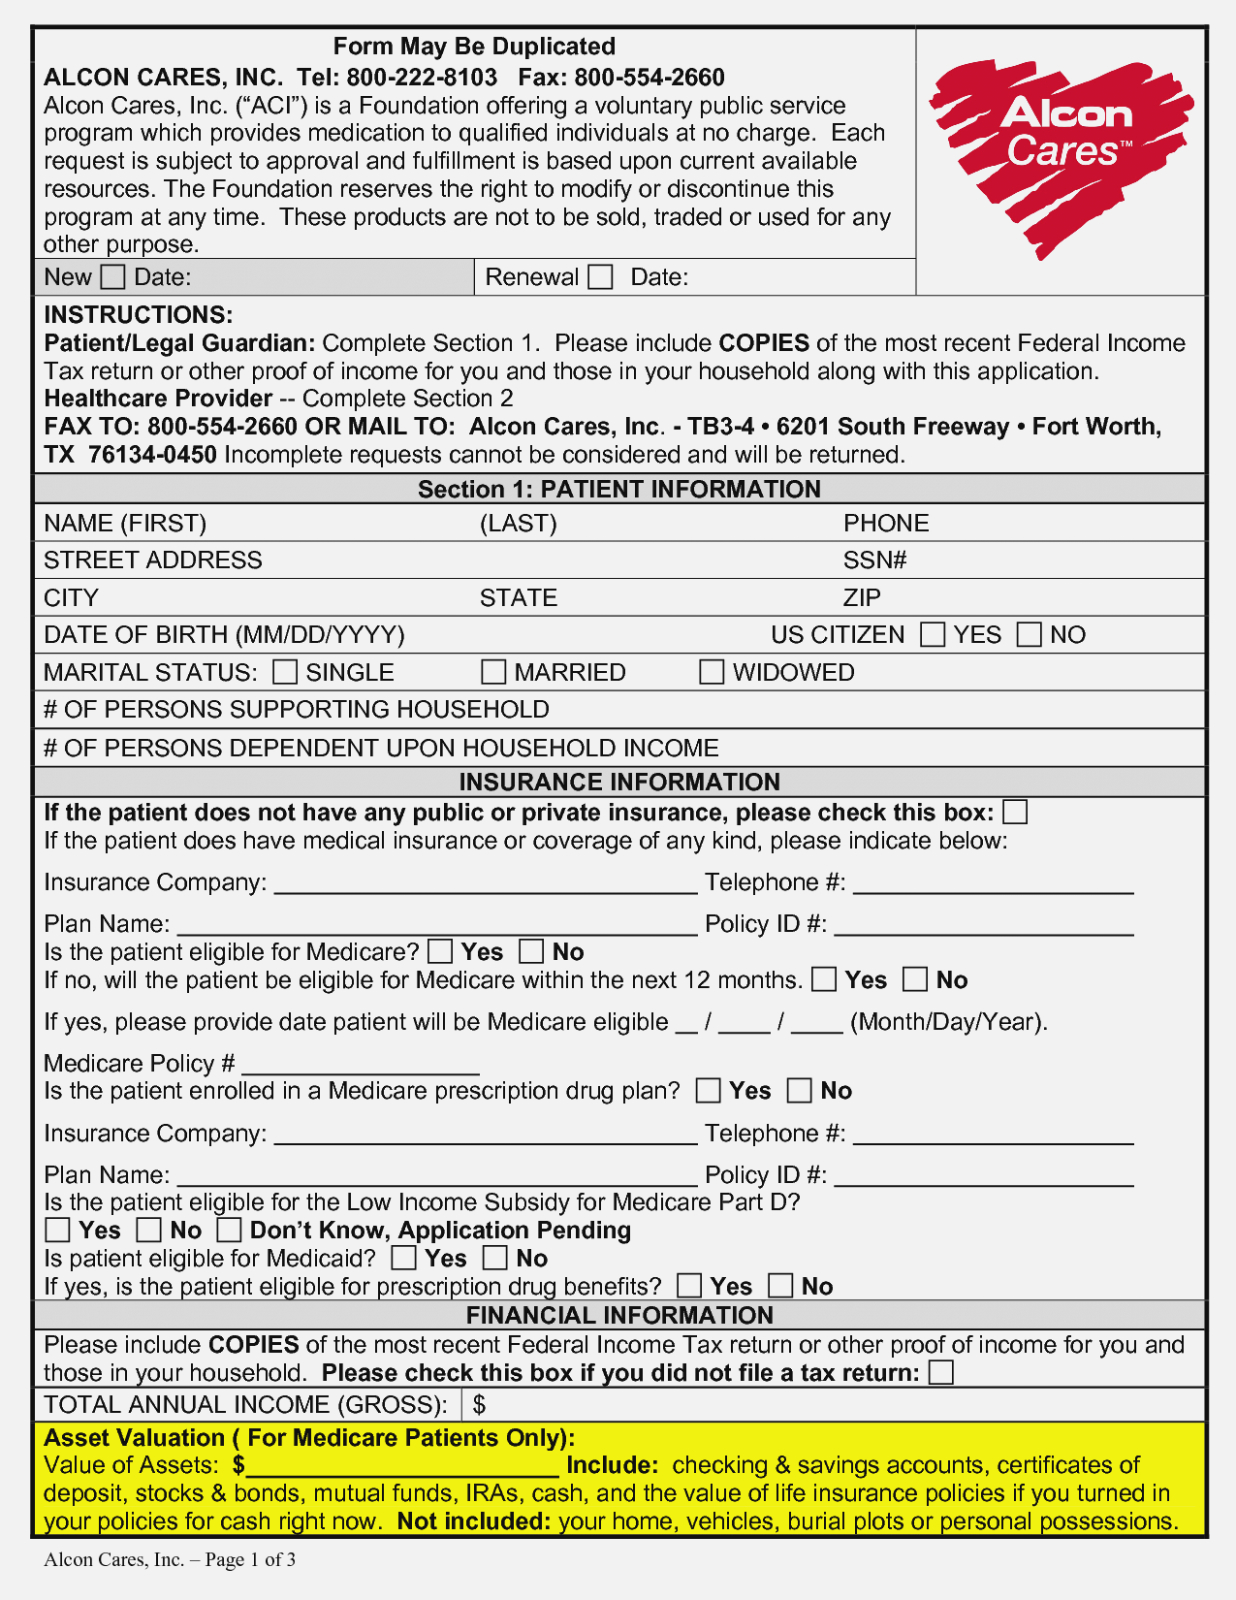 Texas Power Of Attorney Template Unique Power Attorney Form Free - Free Printable Medical Power Of Attorney